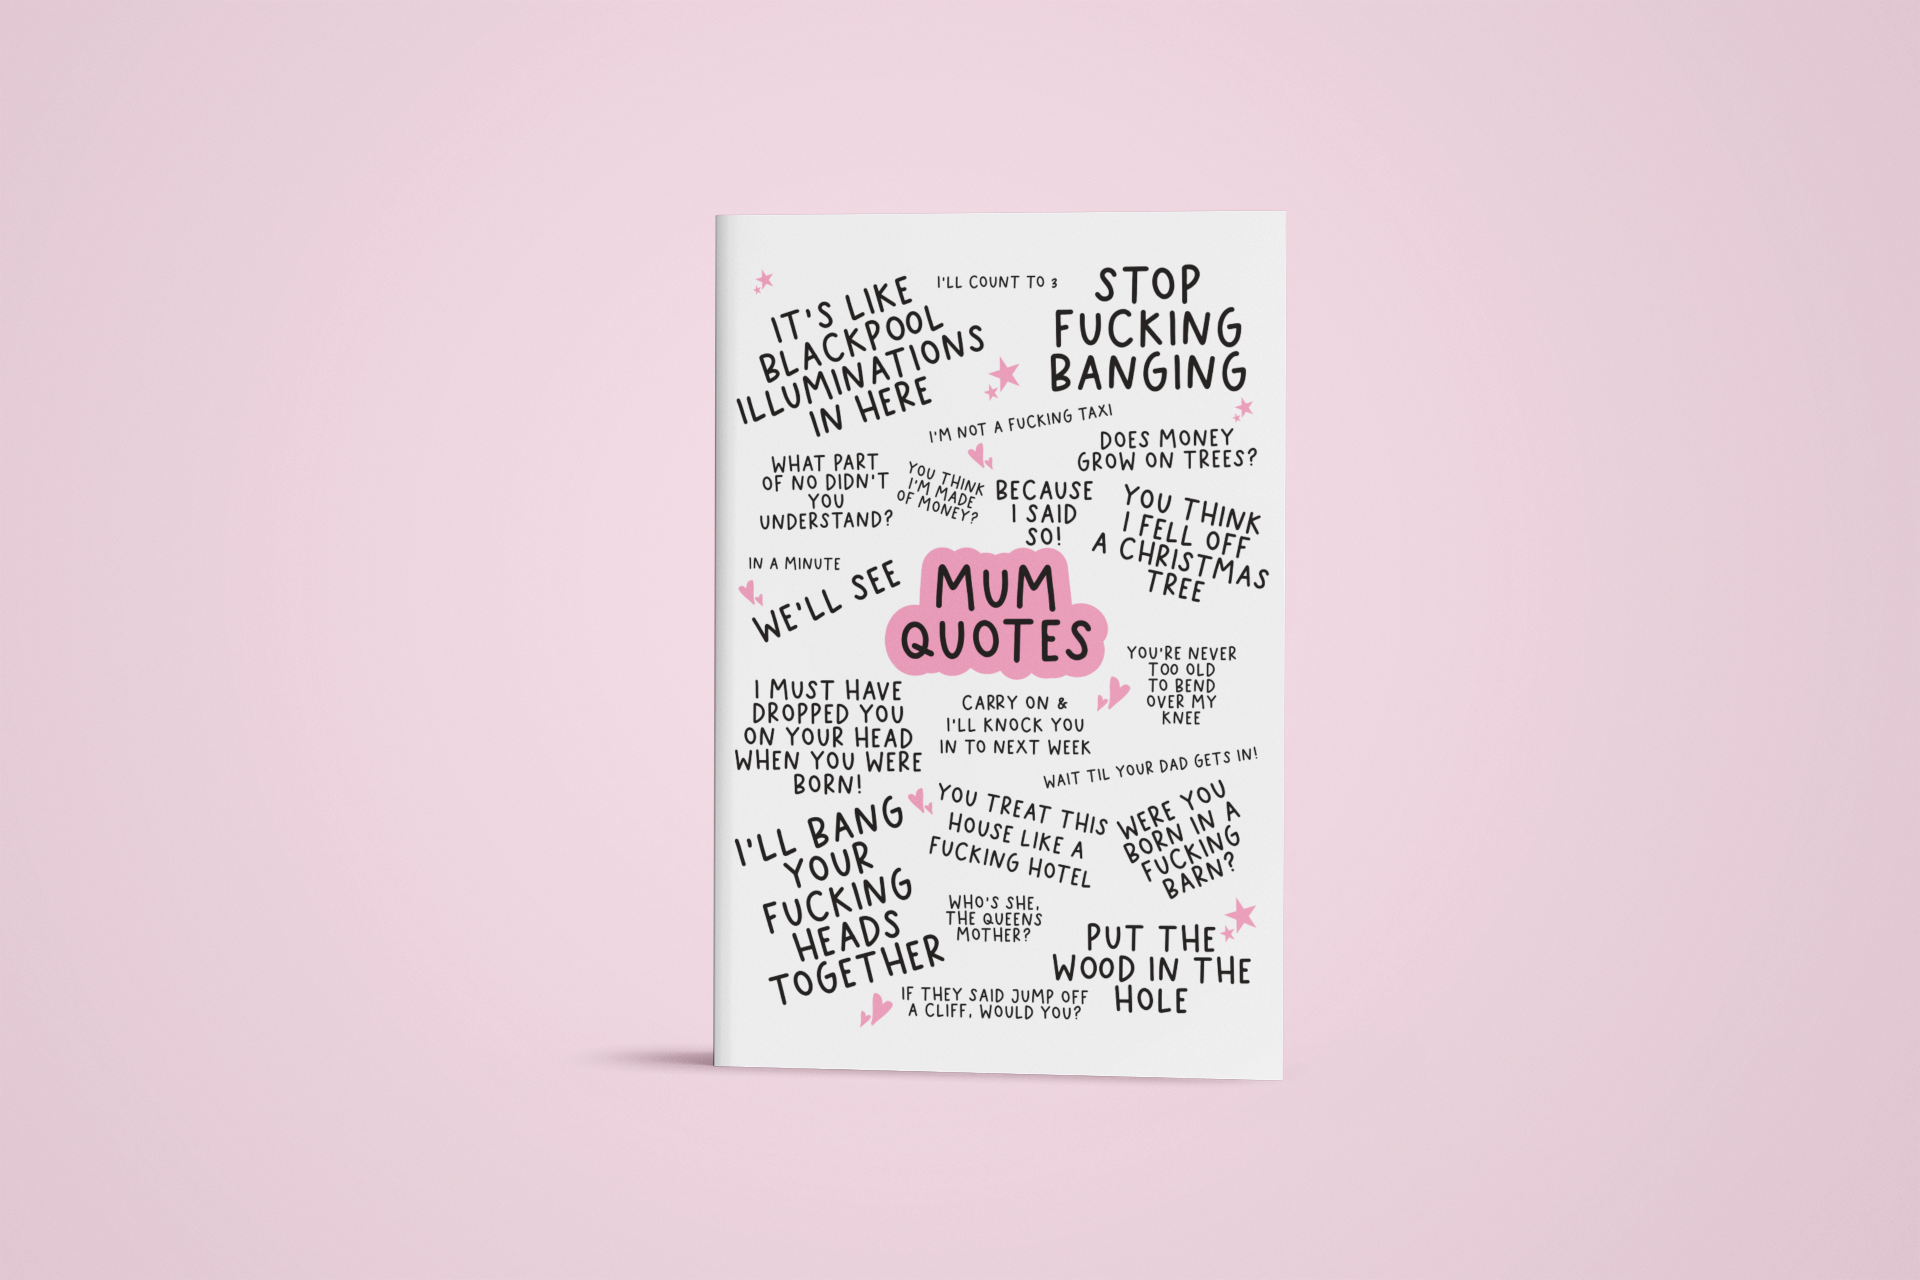 Greetings card featuring famous mum quotes which include 'stop fucking banging, it's like blackpool illuminations in here & i'll bang your fucking heads together'.